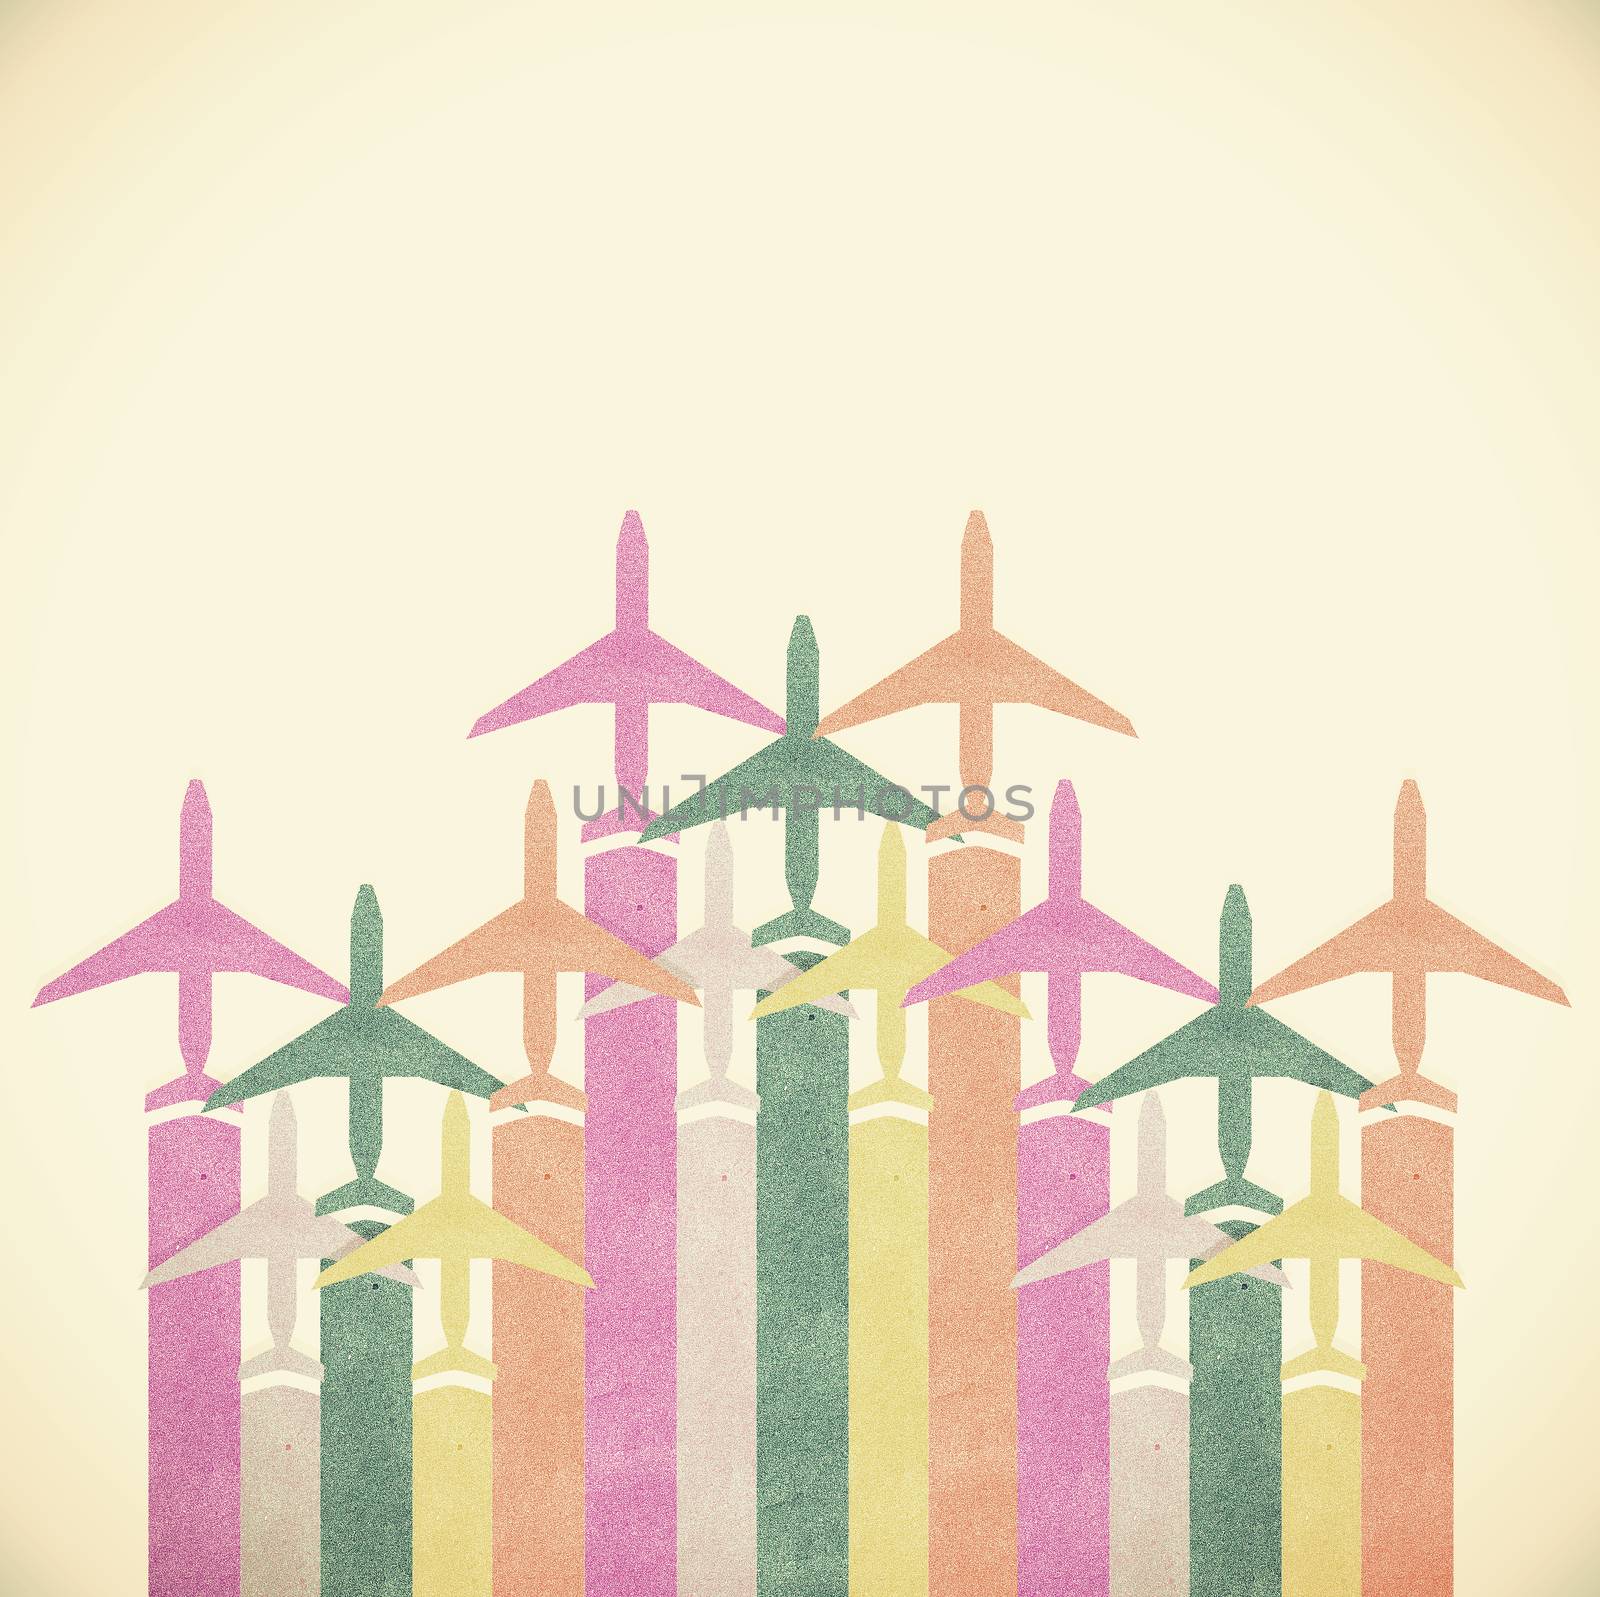 Old Paper texture,Colorful Airplanes on vintage tone background by jakgree